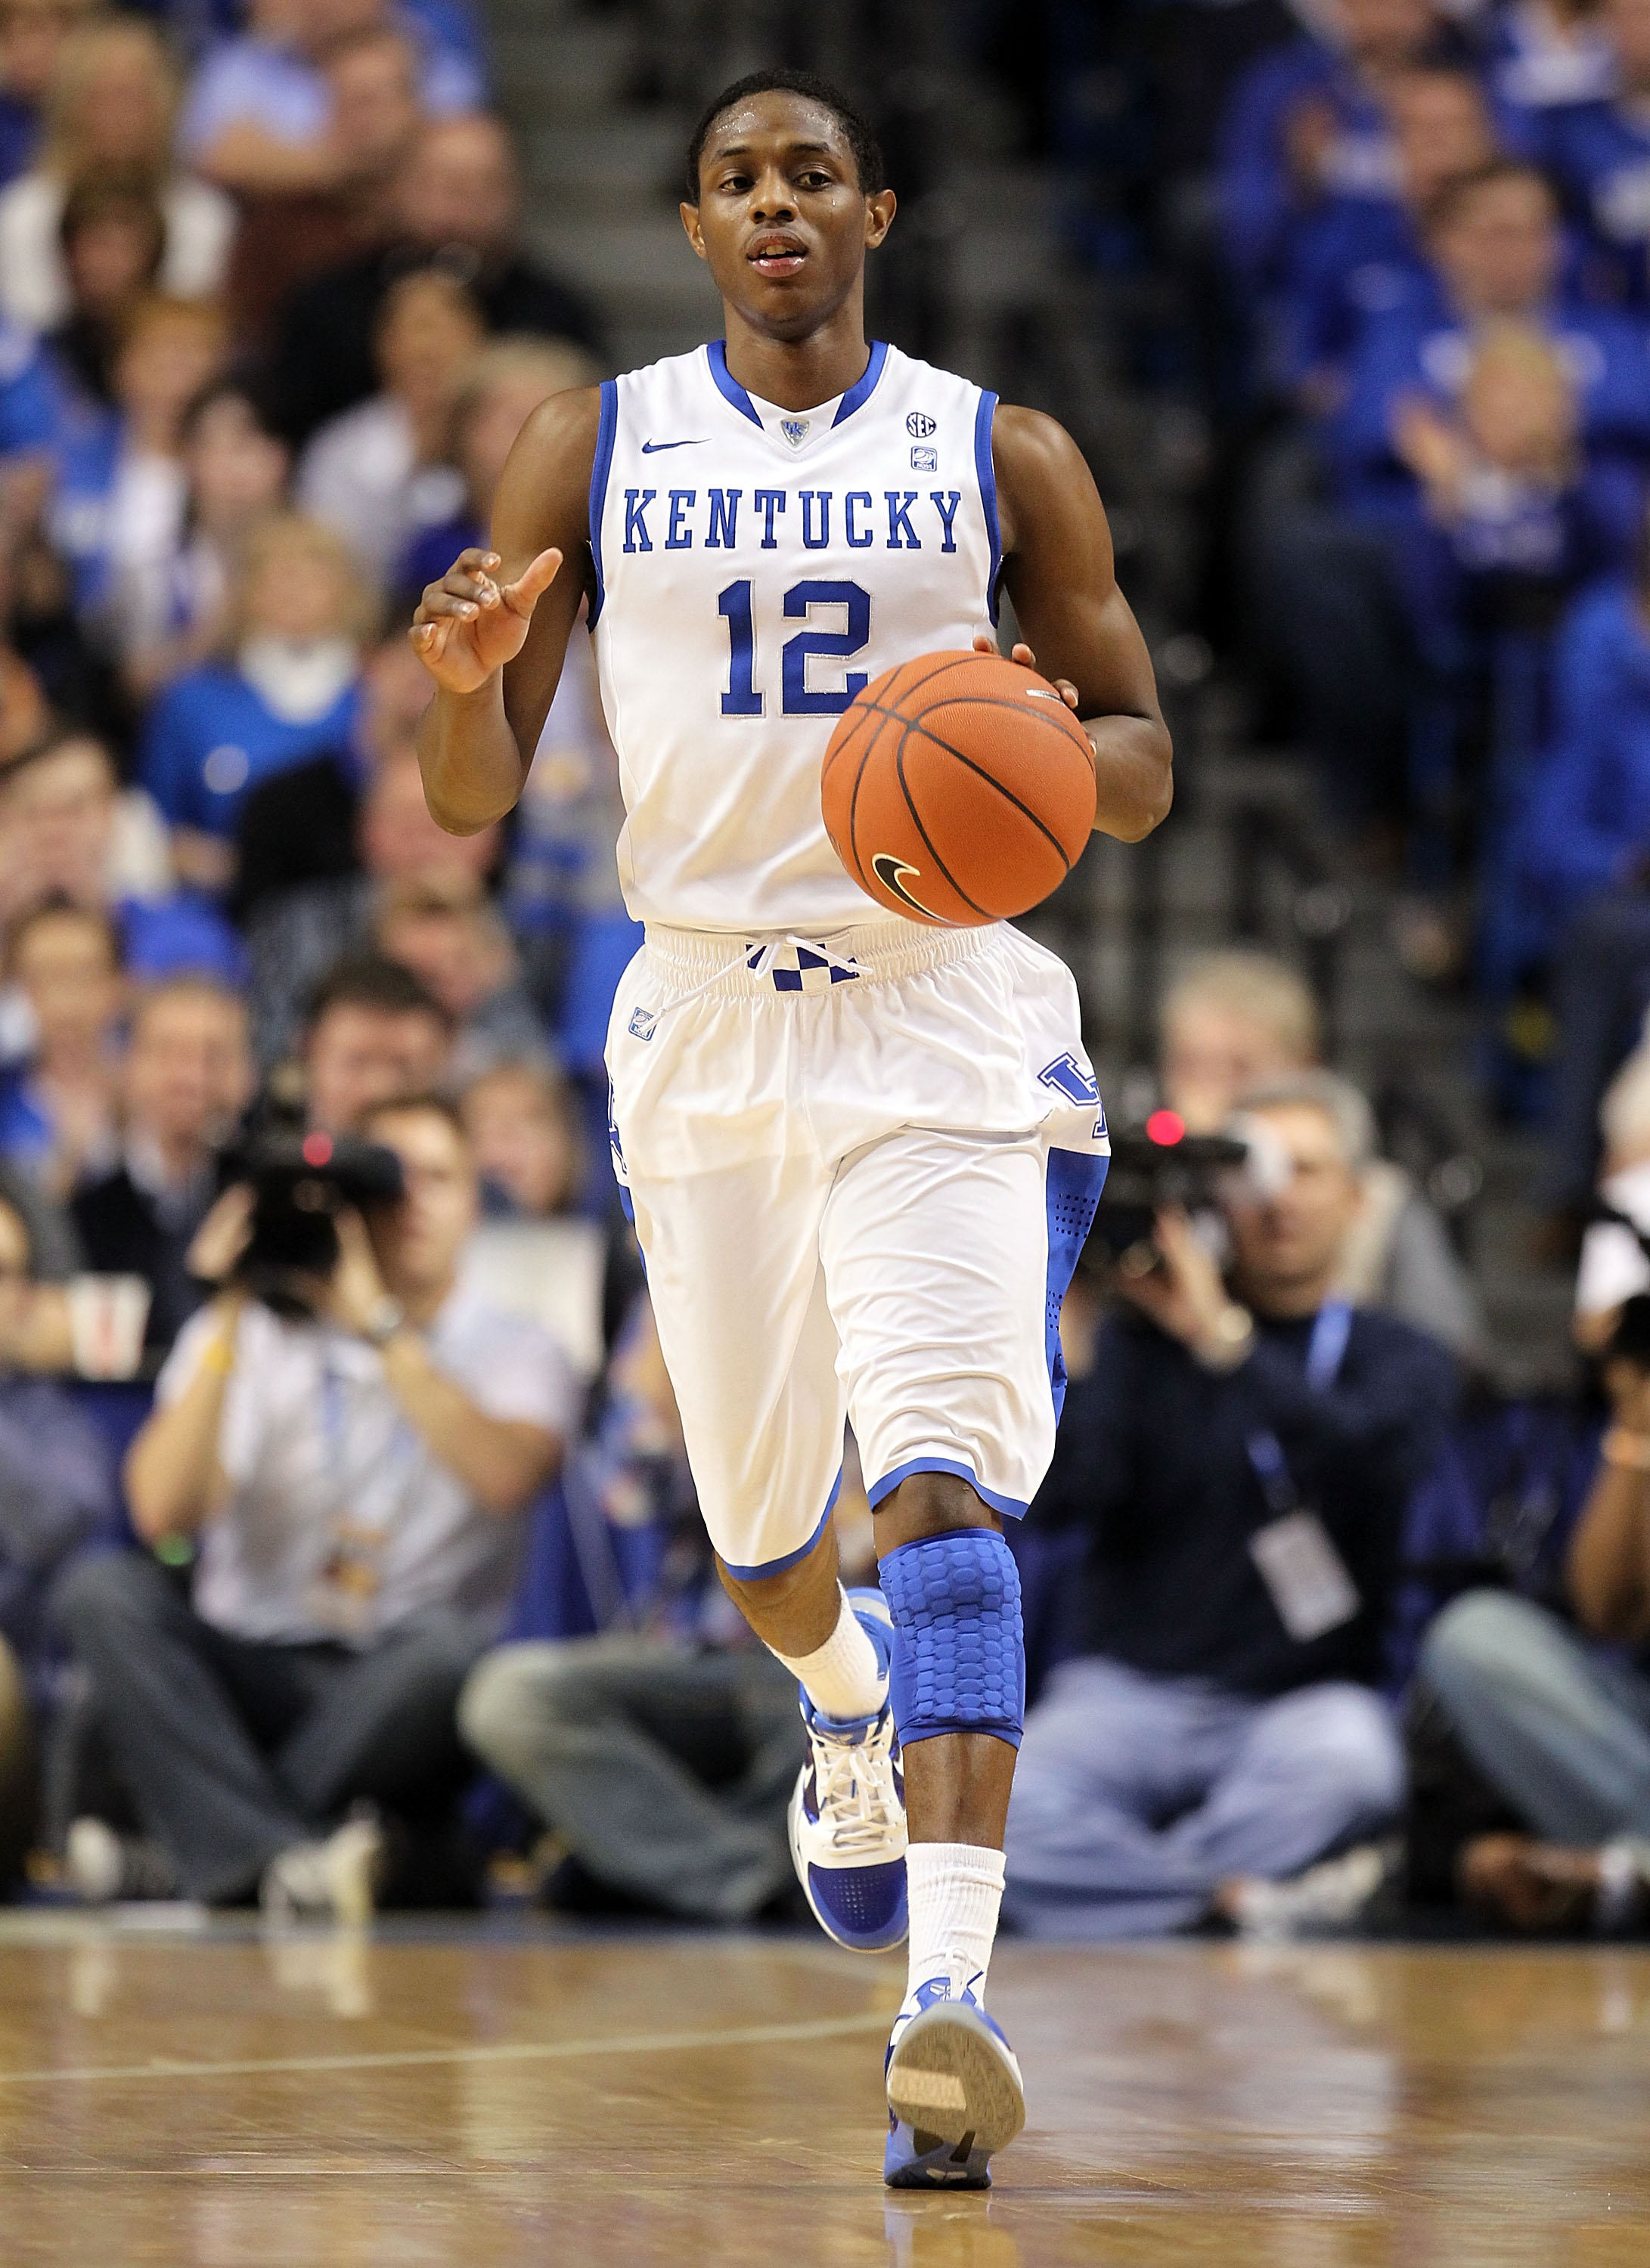 LEXINGTON, KY - JANUARY 29:  Brandon Knight #12 of the Kentucky Wildcats dribbles the ball during the SEC game against the Georgia Bulldogs at Rupp Arena on January 29, 2011 in Lexington, Kentucky. Kentucky won 66-60.  (Photo by Andy Lyons/Getty Images)